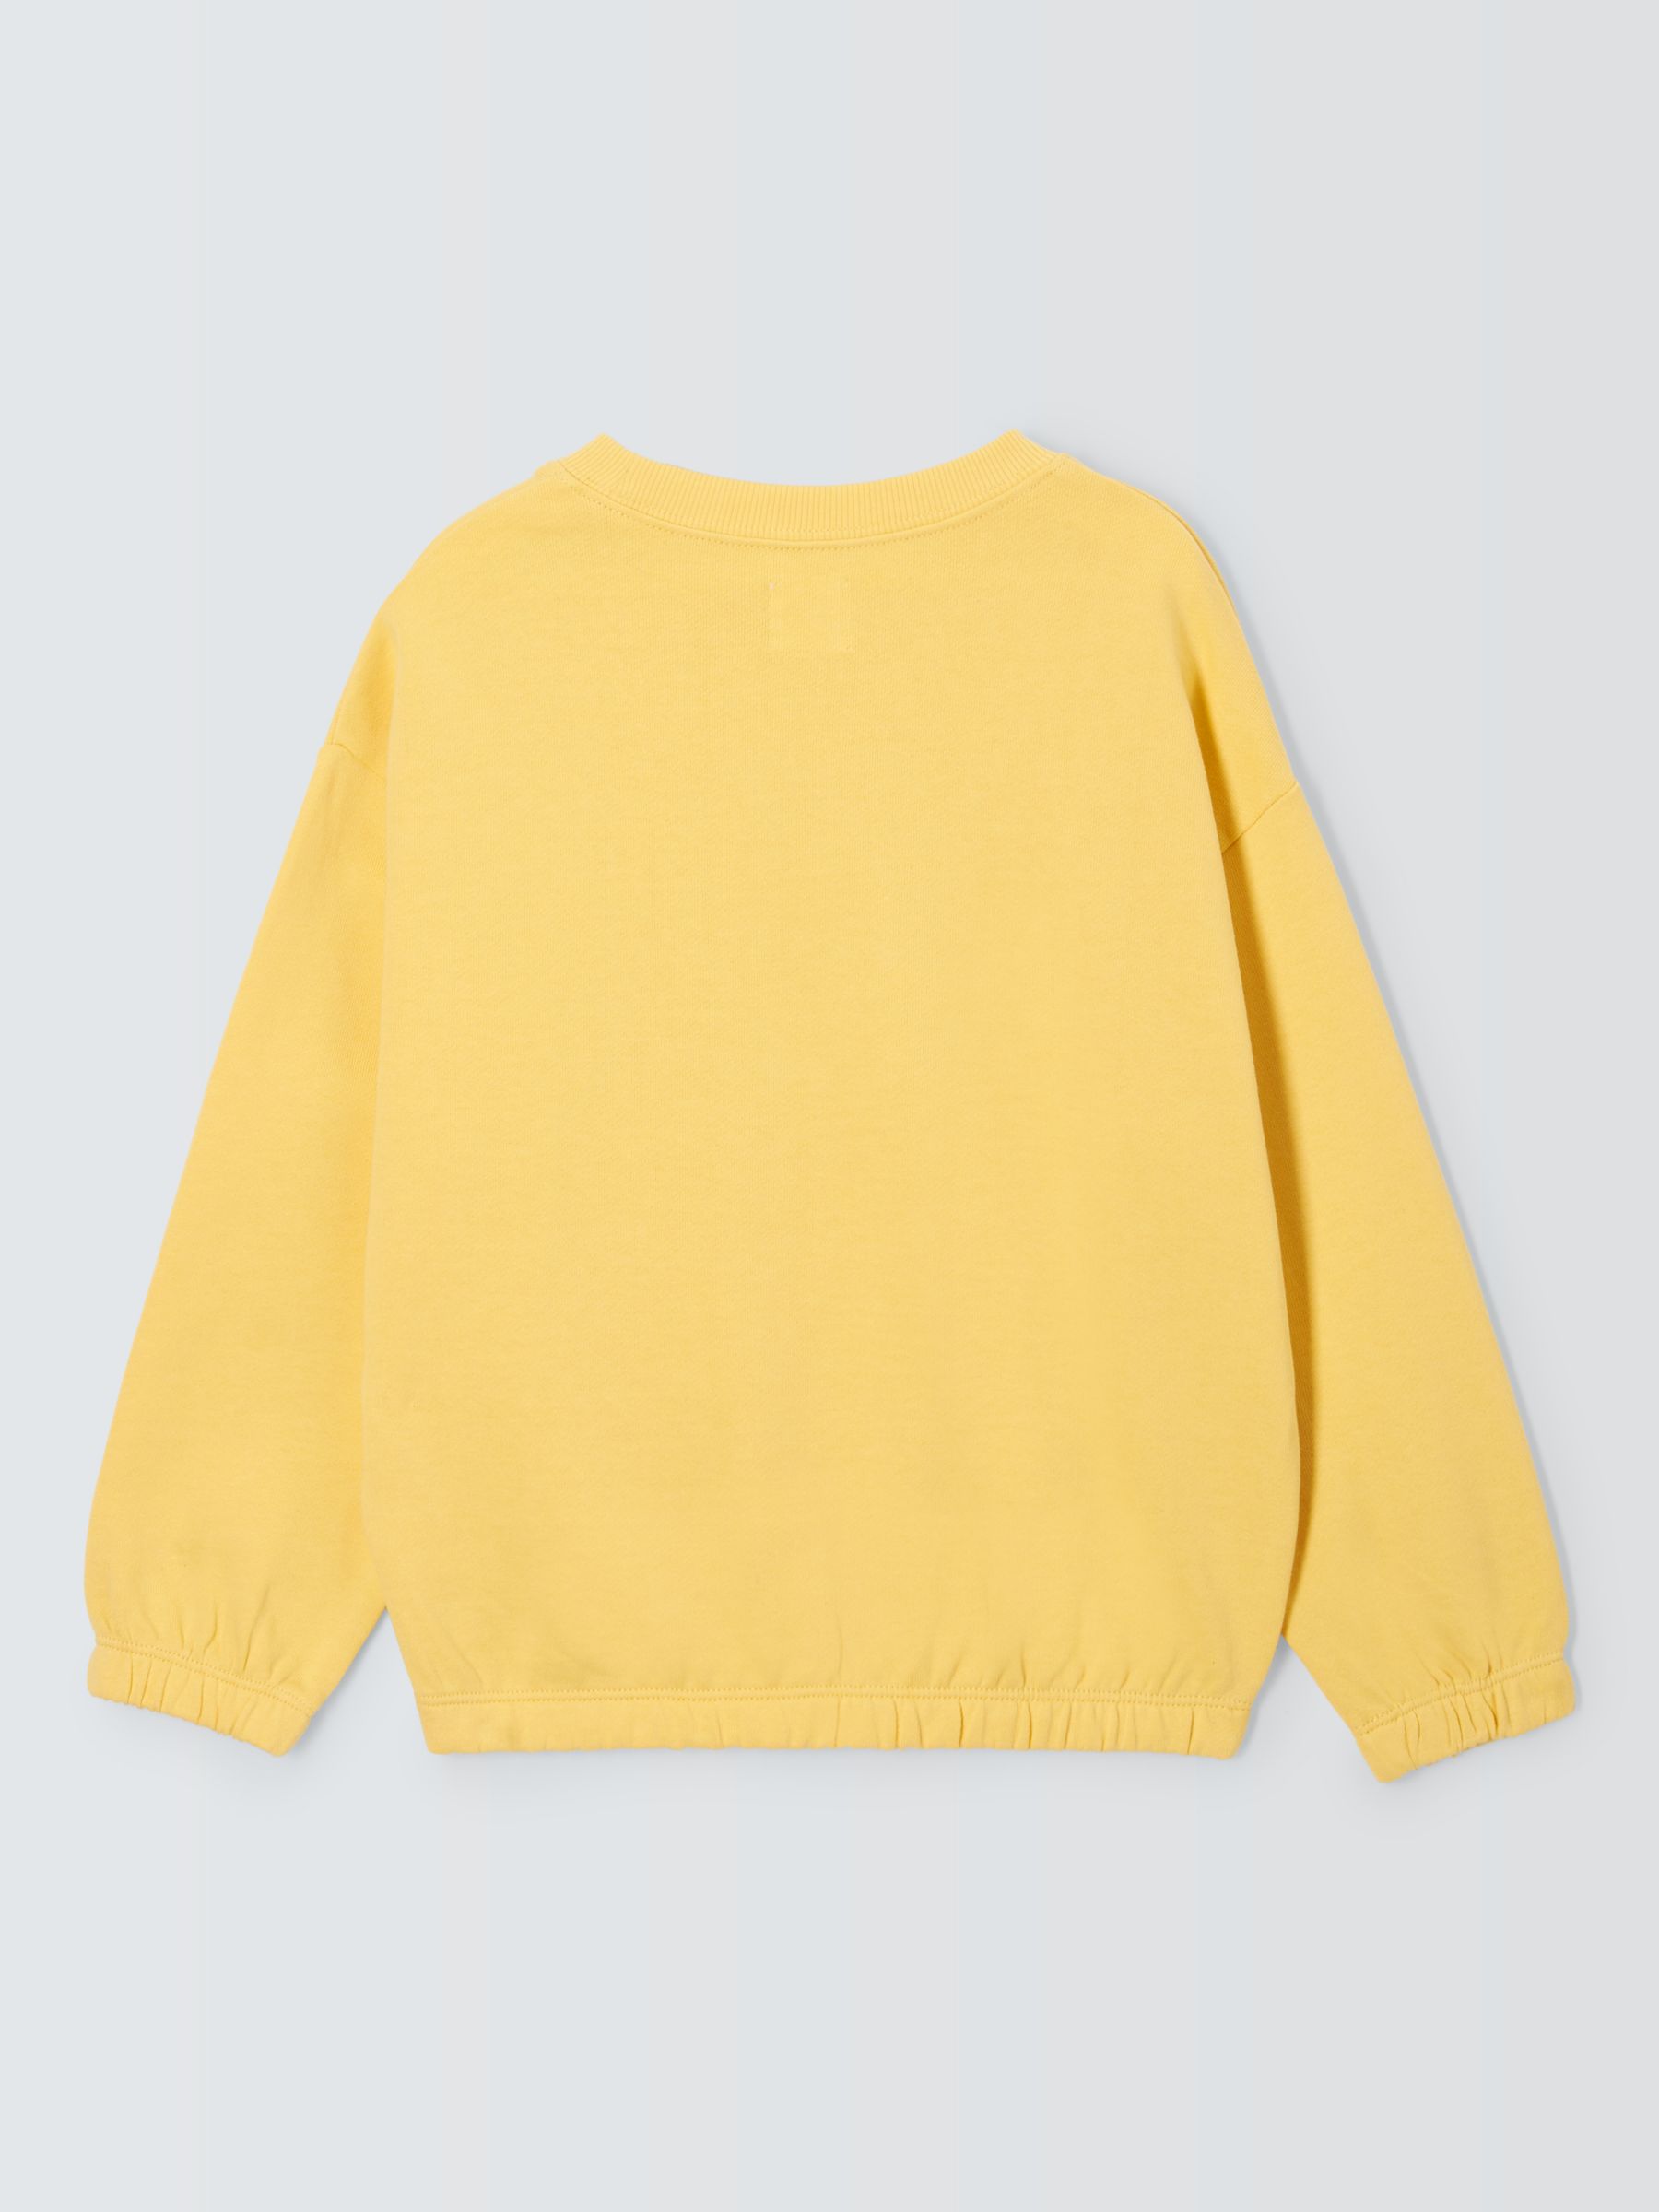 John Lewis ANYDAY Kids' Squeeze The Day Top, Yellow, 11 years